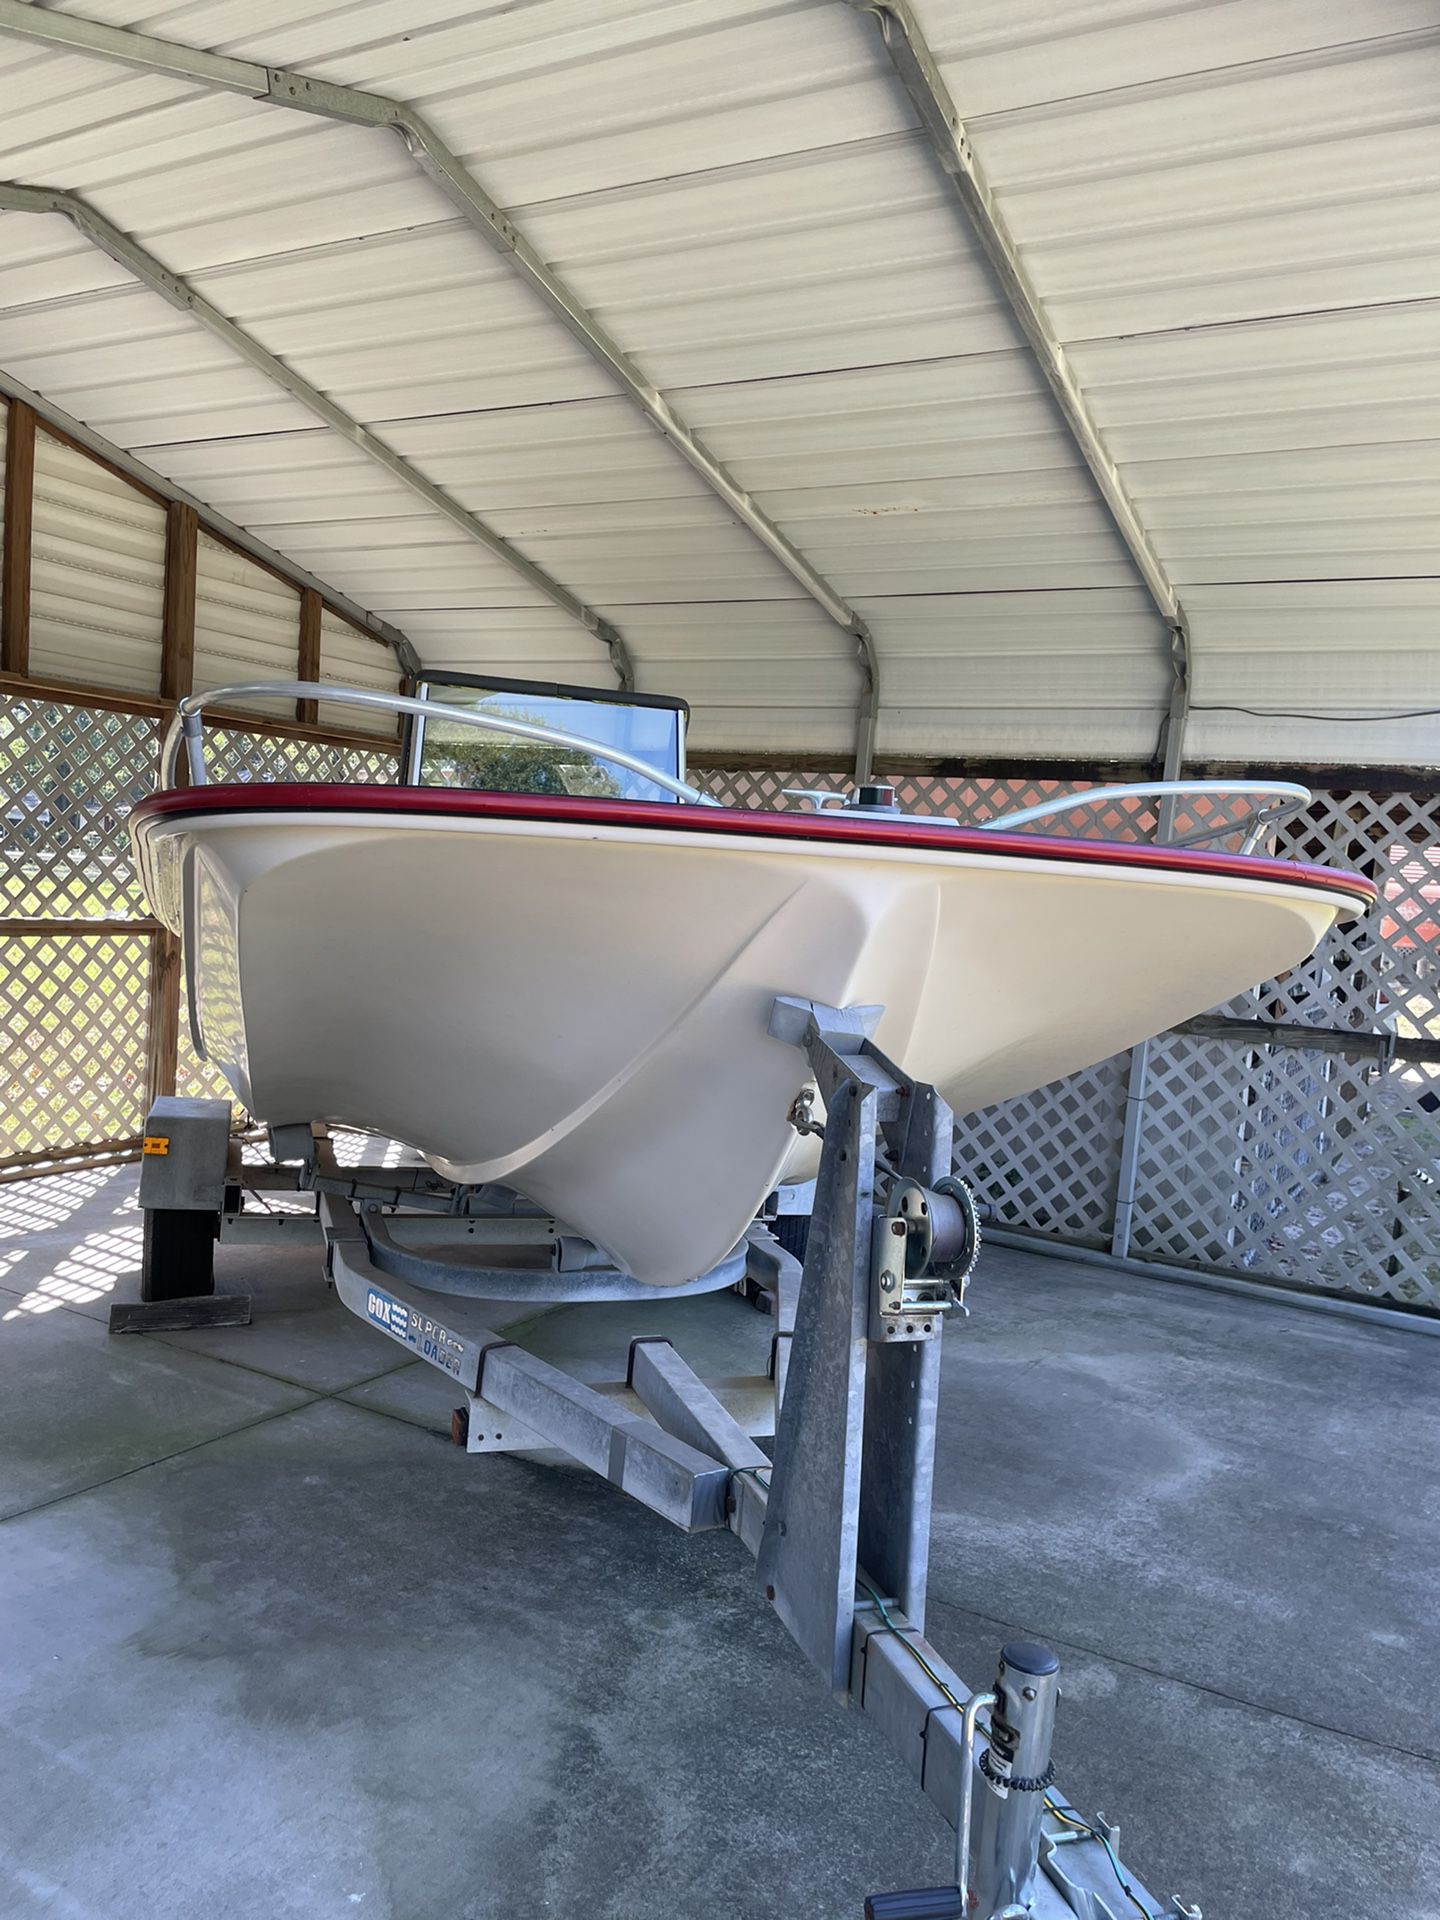 1984 McKee Craft Offshore Center Console - 17.5 Ft With A 150HP Johnson.